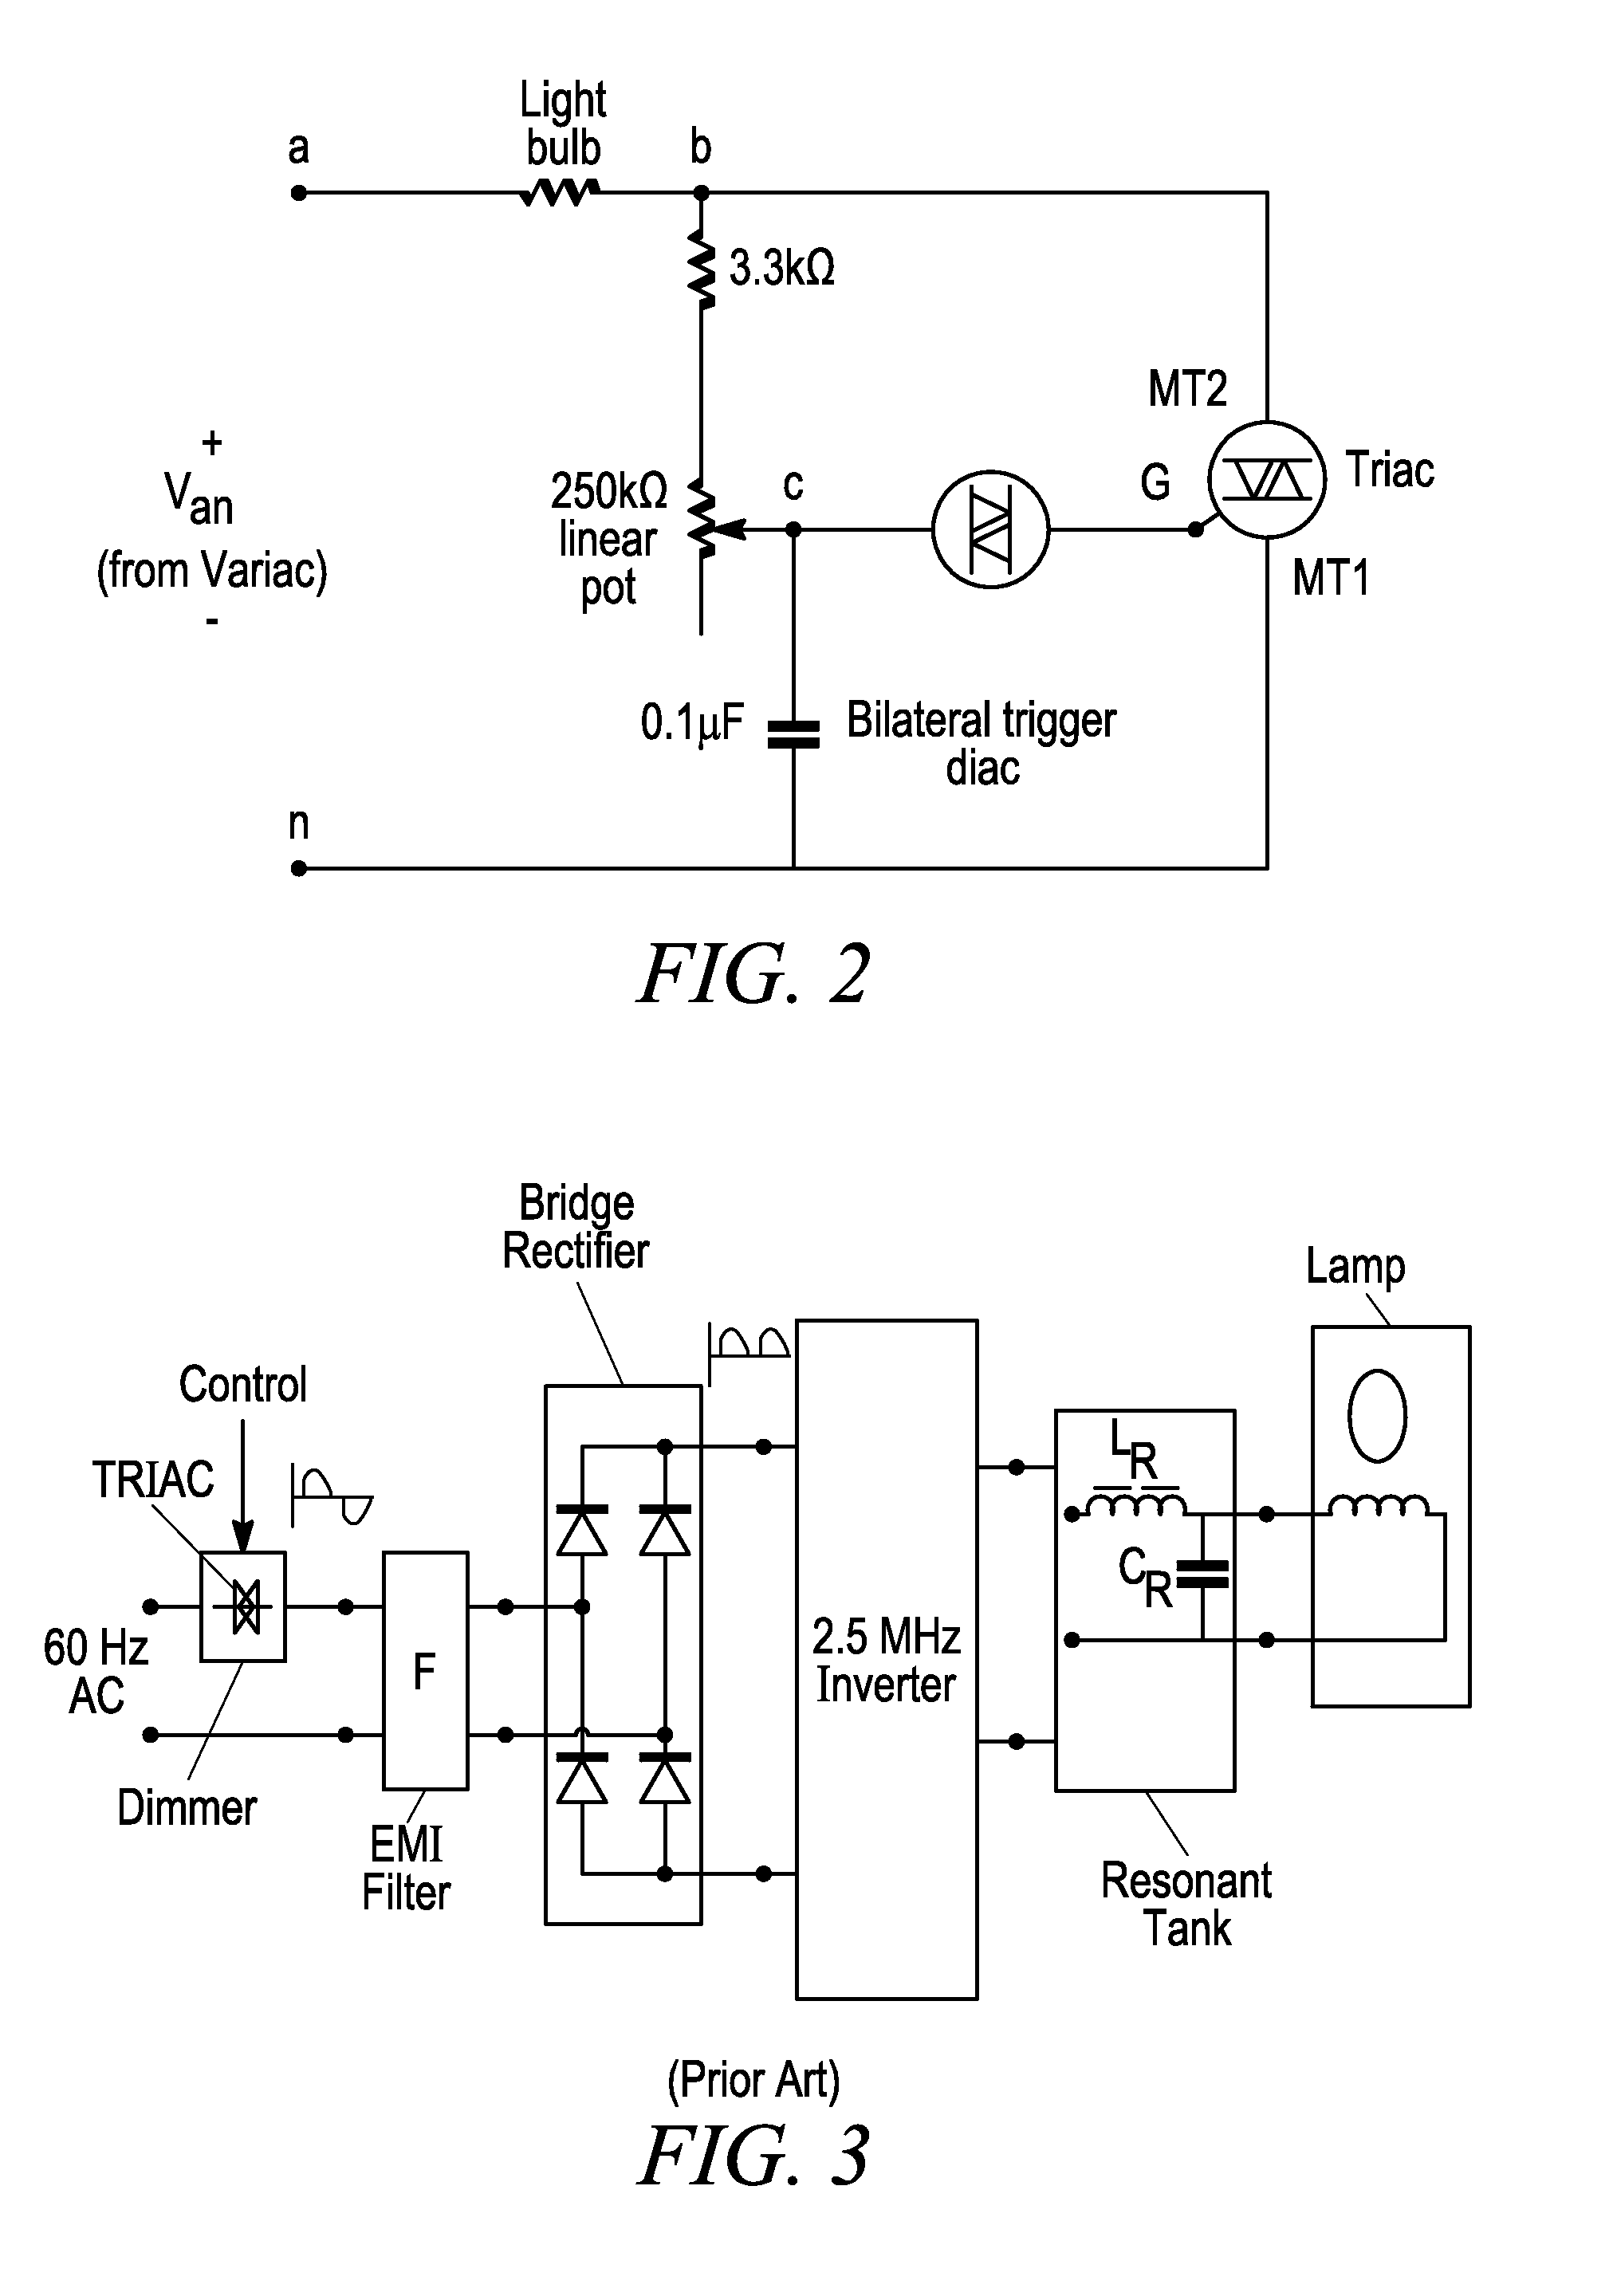 Electronic Ballast Having Improved Power Factor and Total Harmonic Distortion